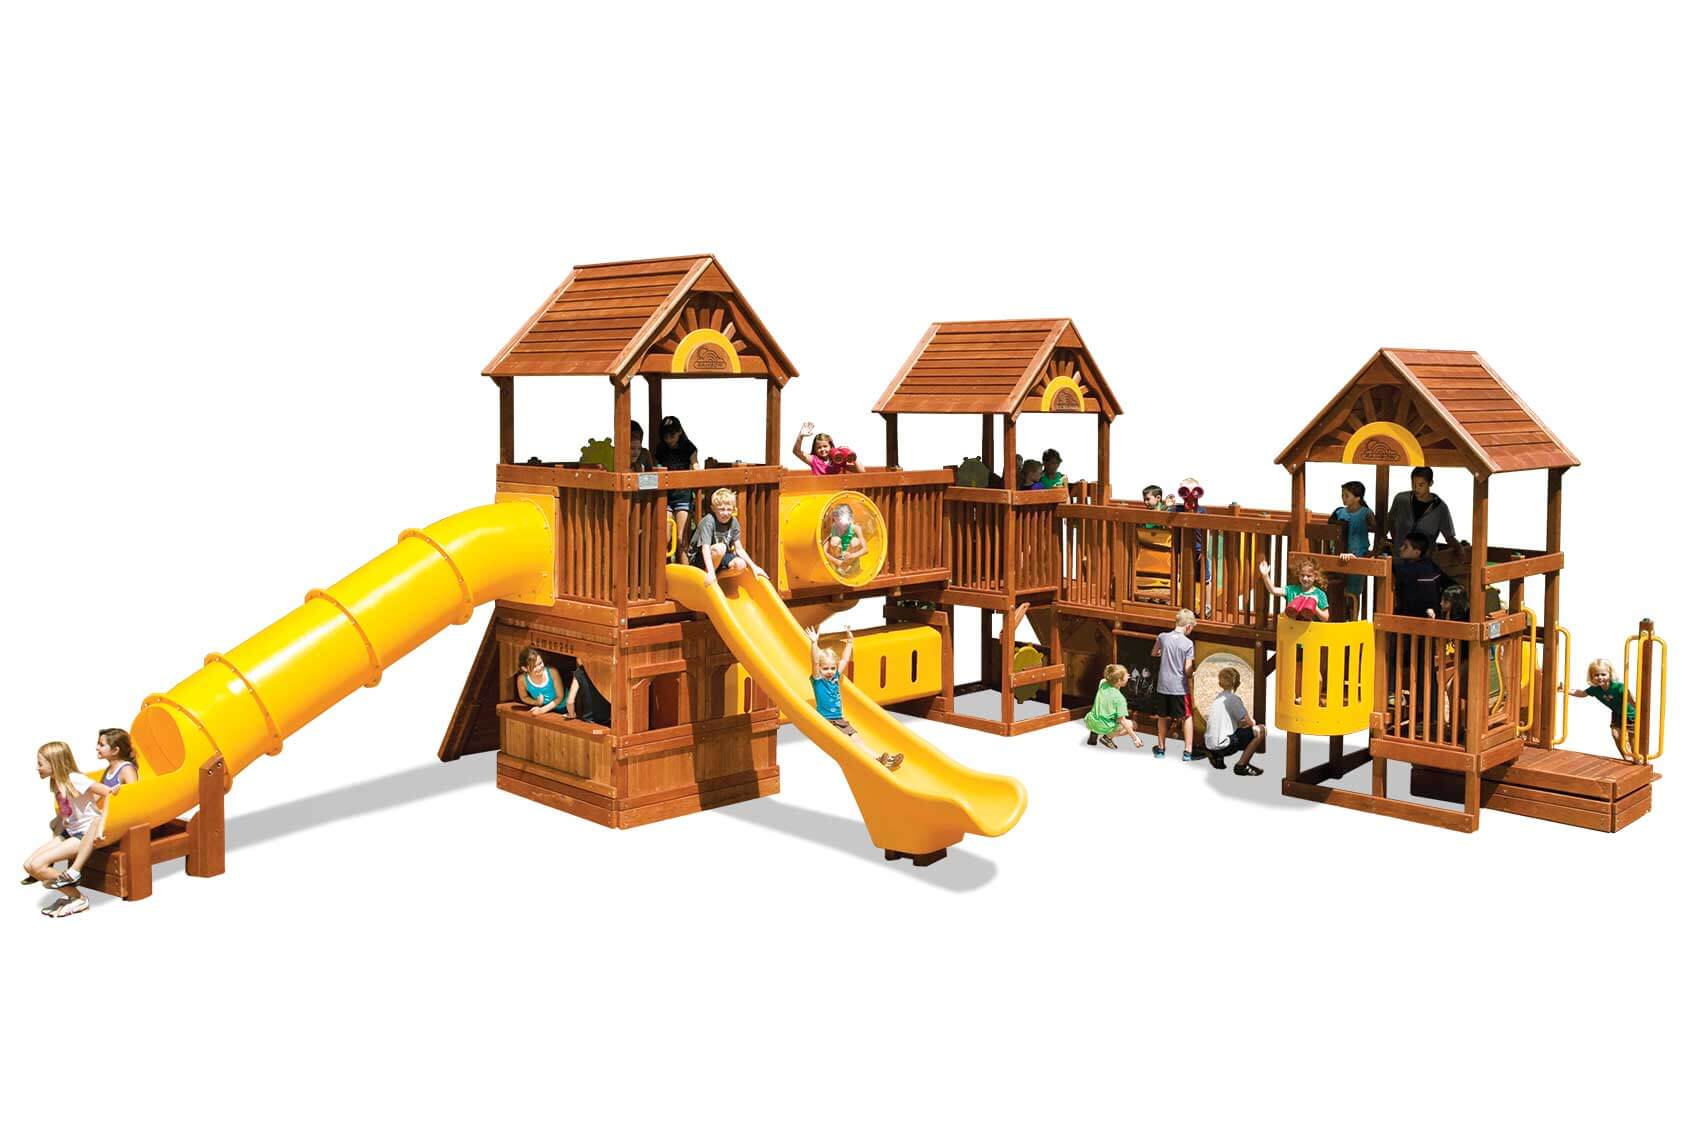 Commercial Playground Equipment – Rainbow Play Village Design C (RPS-98C) - Rainbow Play Systems of Texas